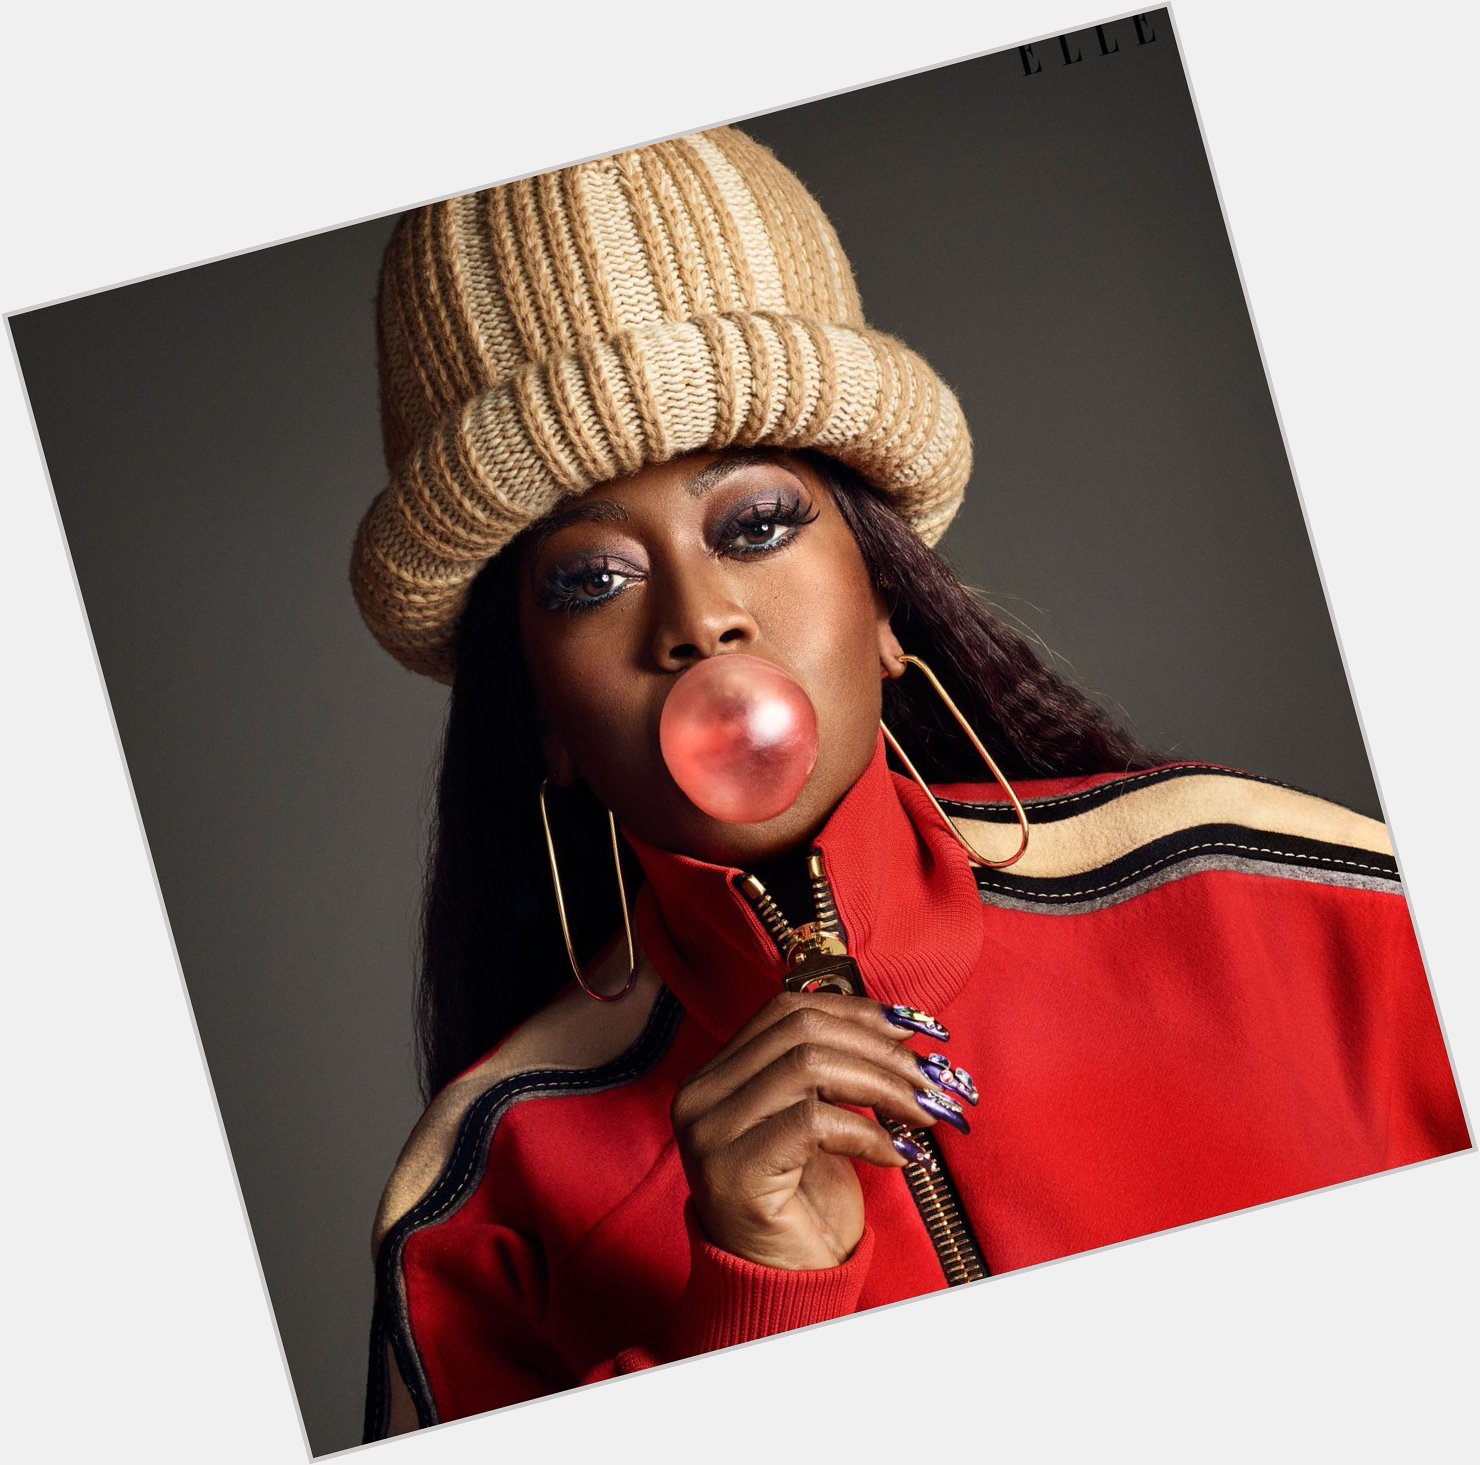 Happy Birthday Missy Elliott!
The Walker Collective - A Law Firm For Creatives
 